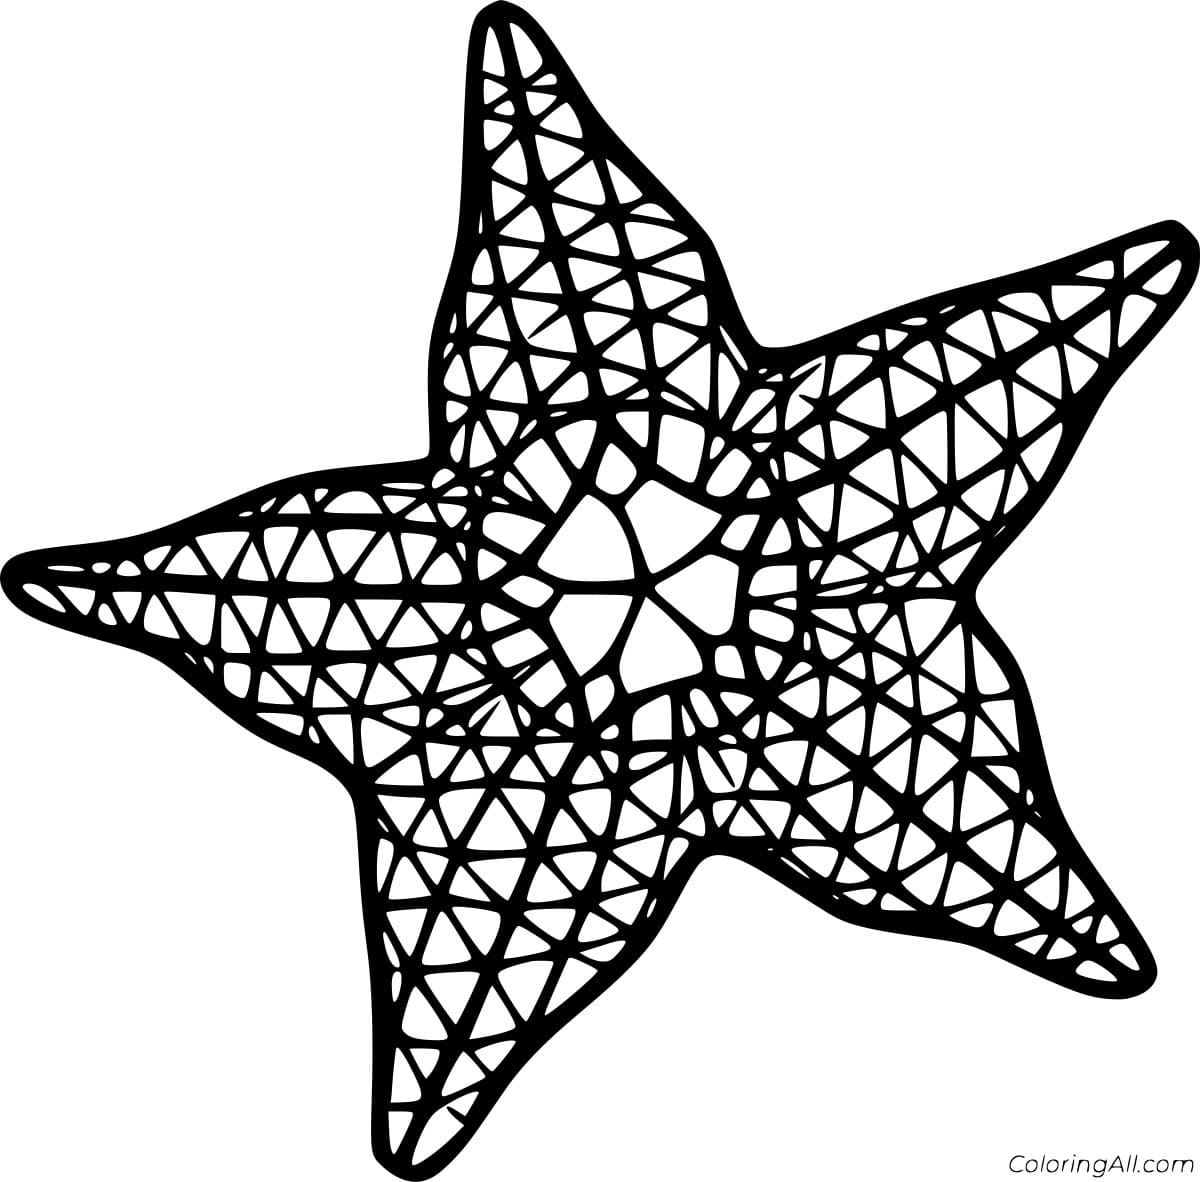 Starfish With Patterns Image